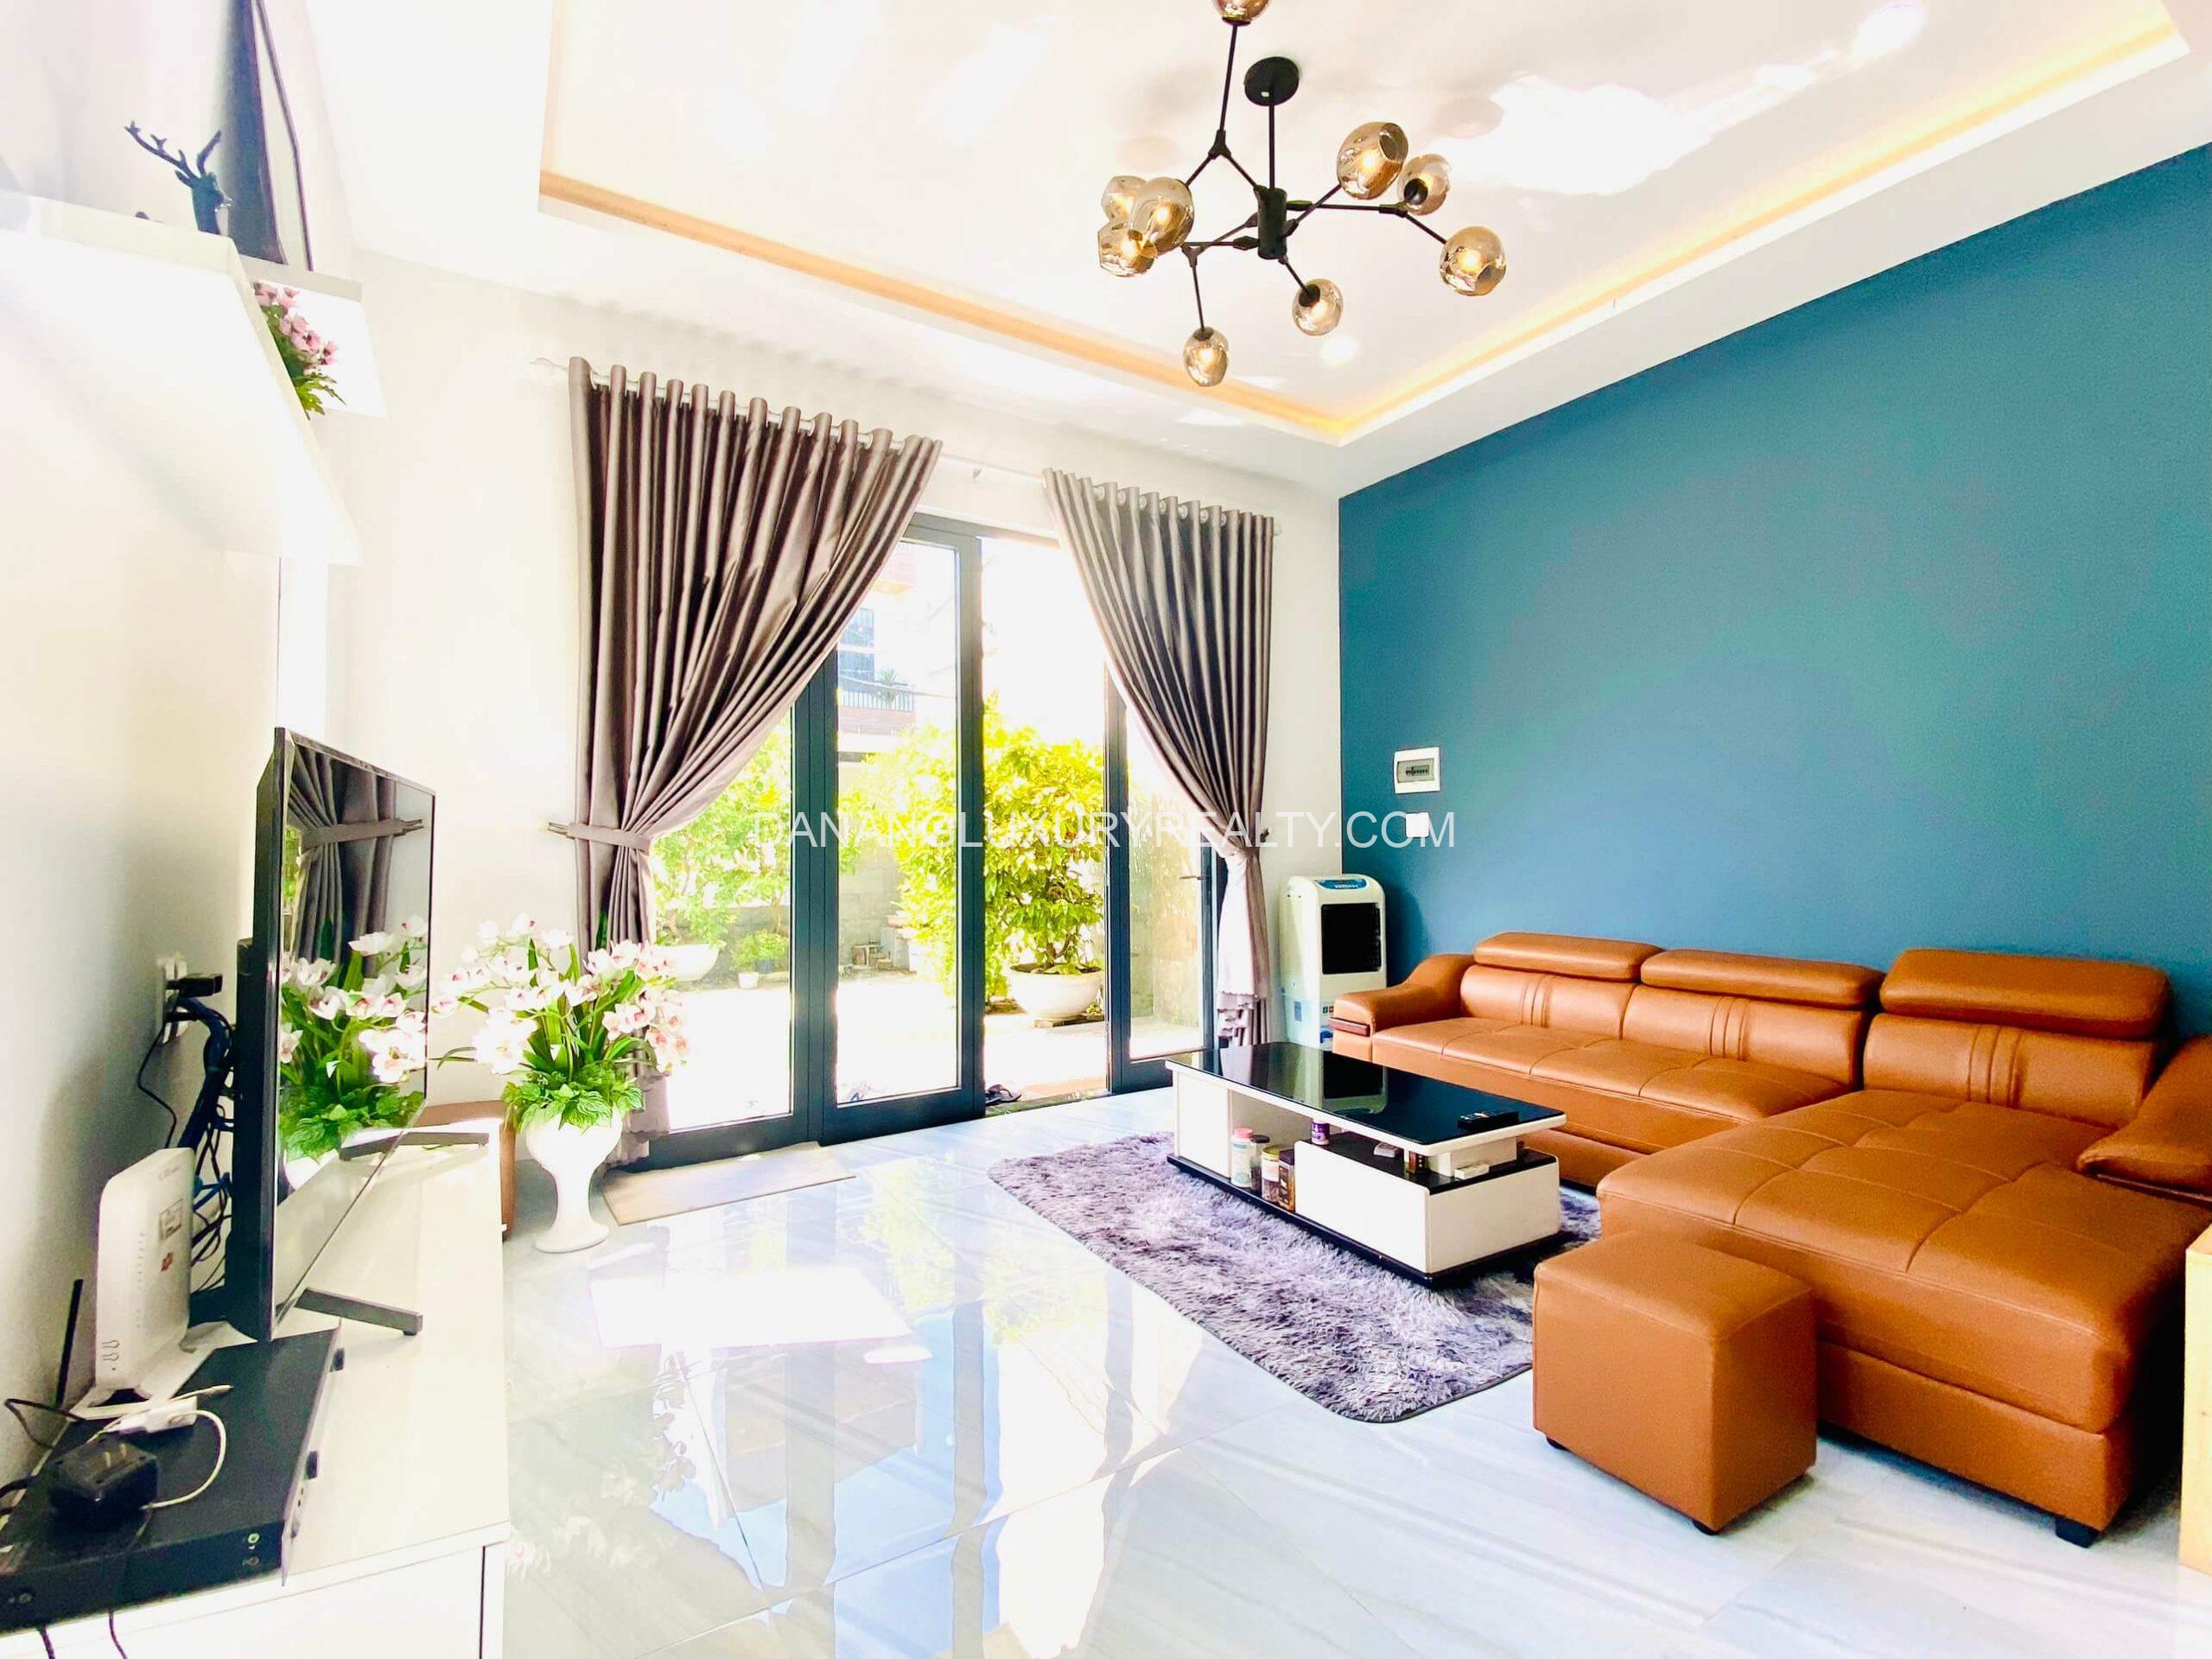 Villa for rent in Ngu Hanh Son Da Nang with full featured furnishment. 